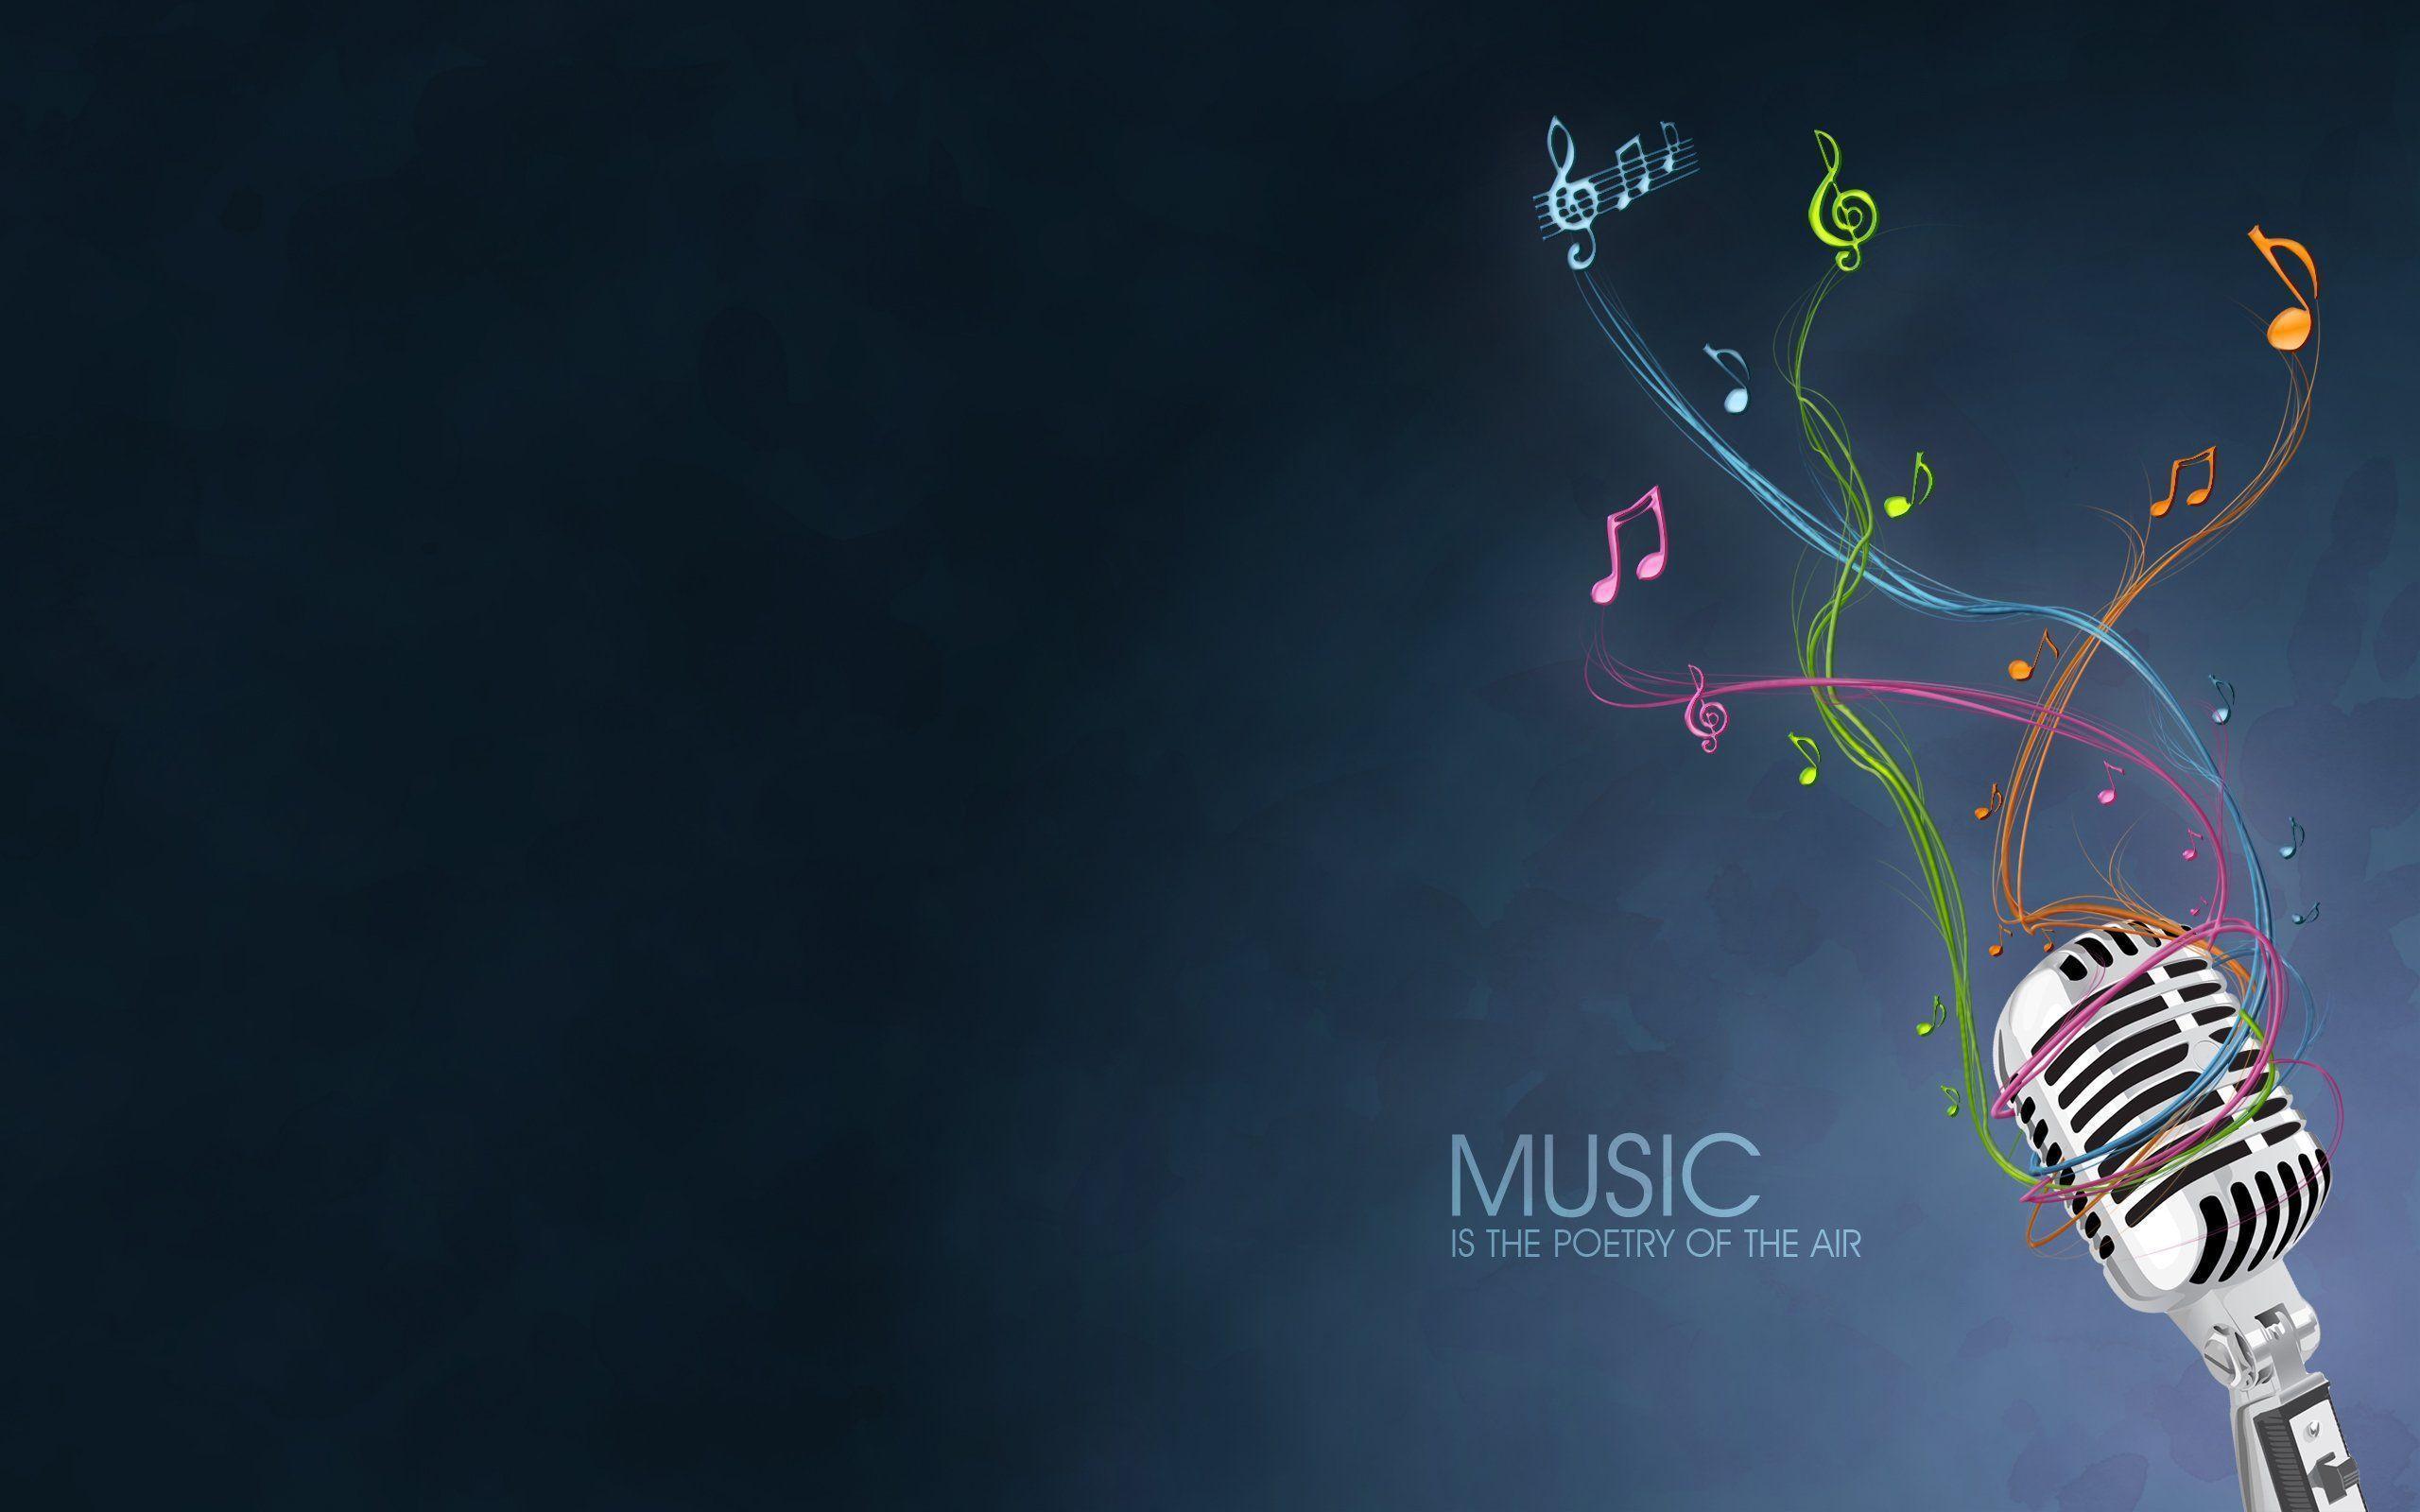 Free Music Wallpaper HD for PC: Be Musical!. Music wallpaper